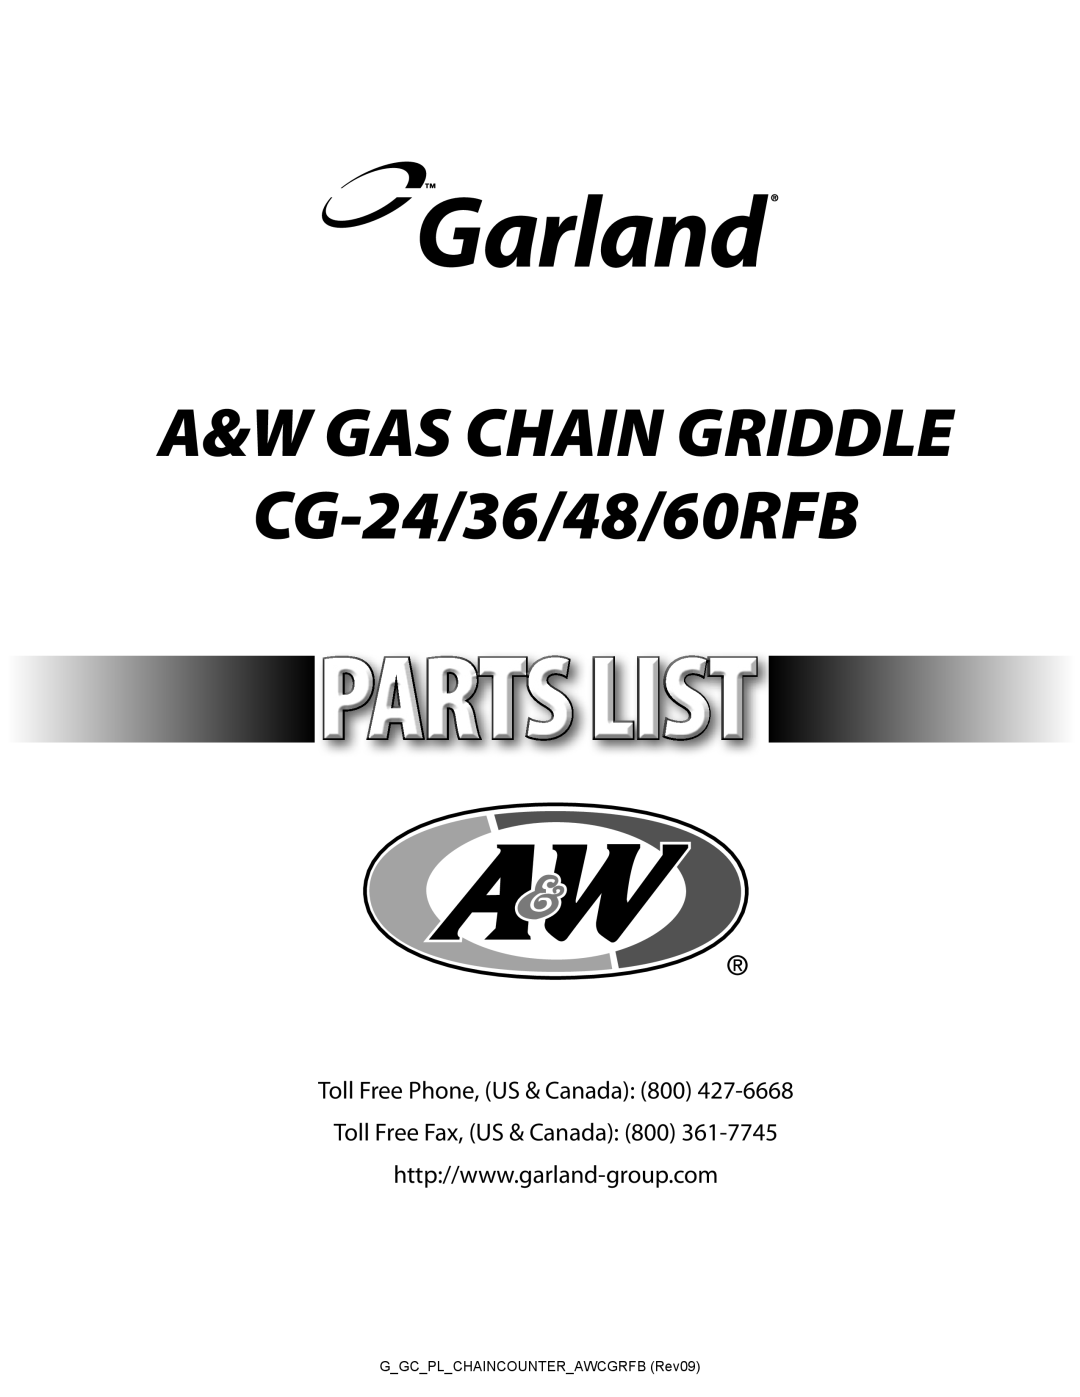 Garland manual A&W GAS CHAIN GRIDDLE CG-24/36/48/60RFB, Toll Free Phone, US & Canada, Toll Free Fax, US & Canada 